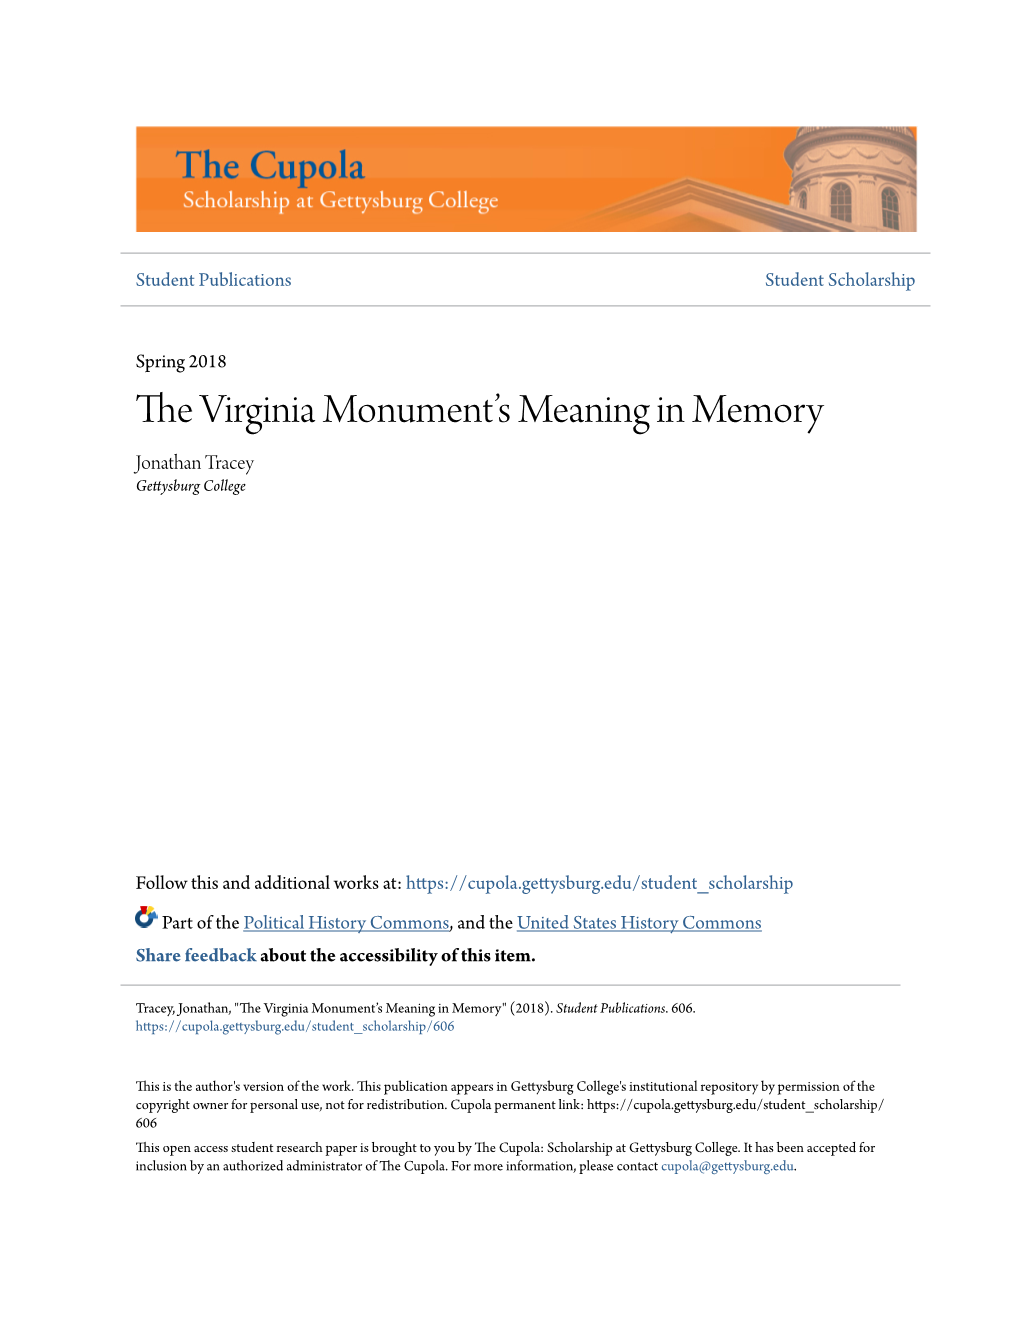 The Virginia Monument's Meaning in Memory